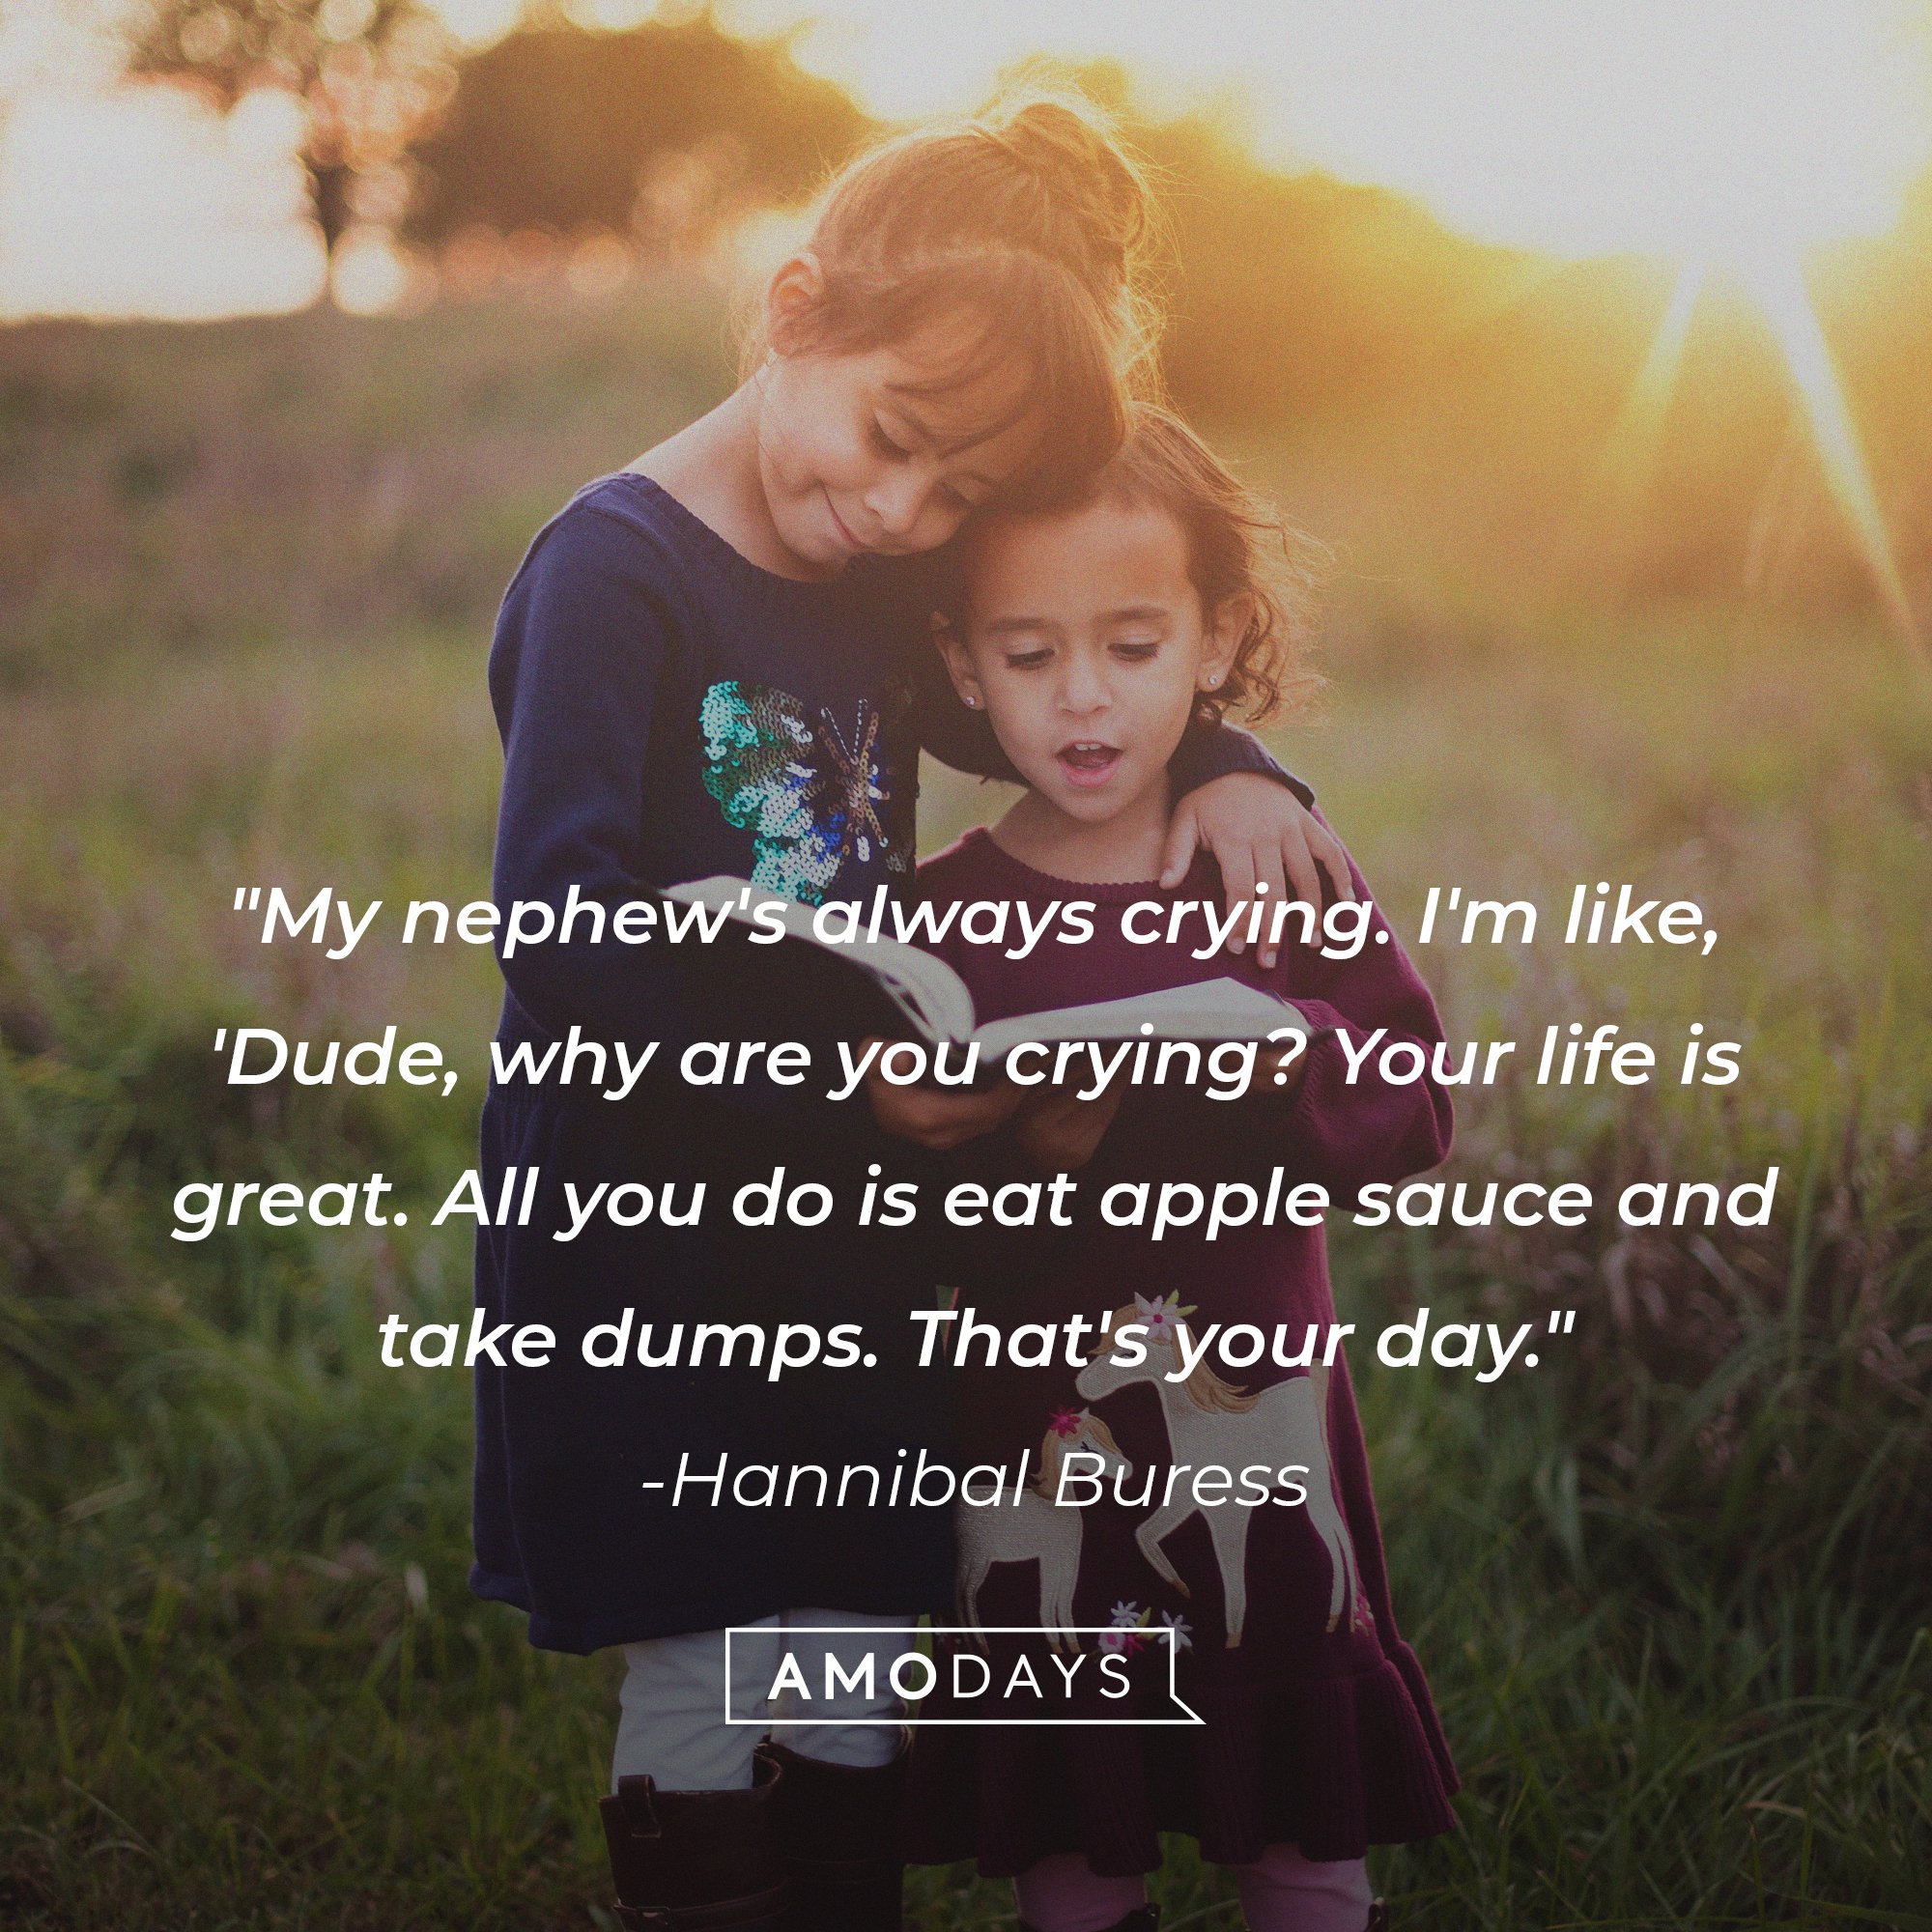 Hannibal Buress's quote: "My nephew's always crying. I'm like, 'Dude, why are you crying? Your life is great. All you do is eat apple sauce and take dumps. That's your day." | Image: AmoDays